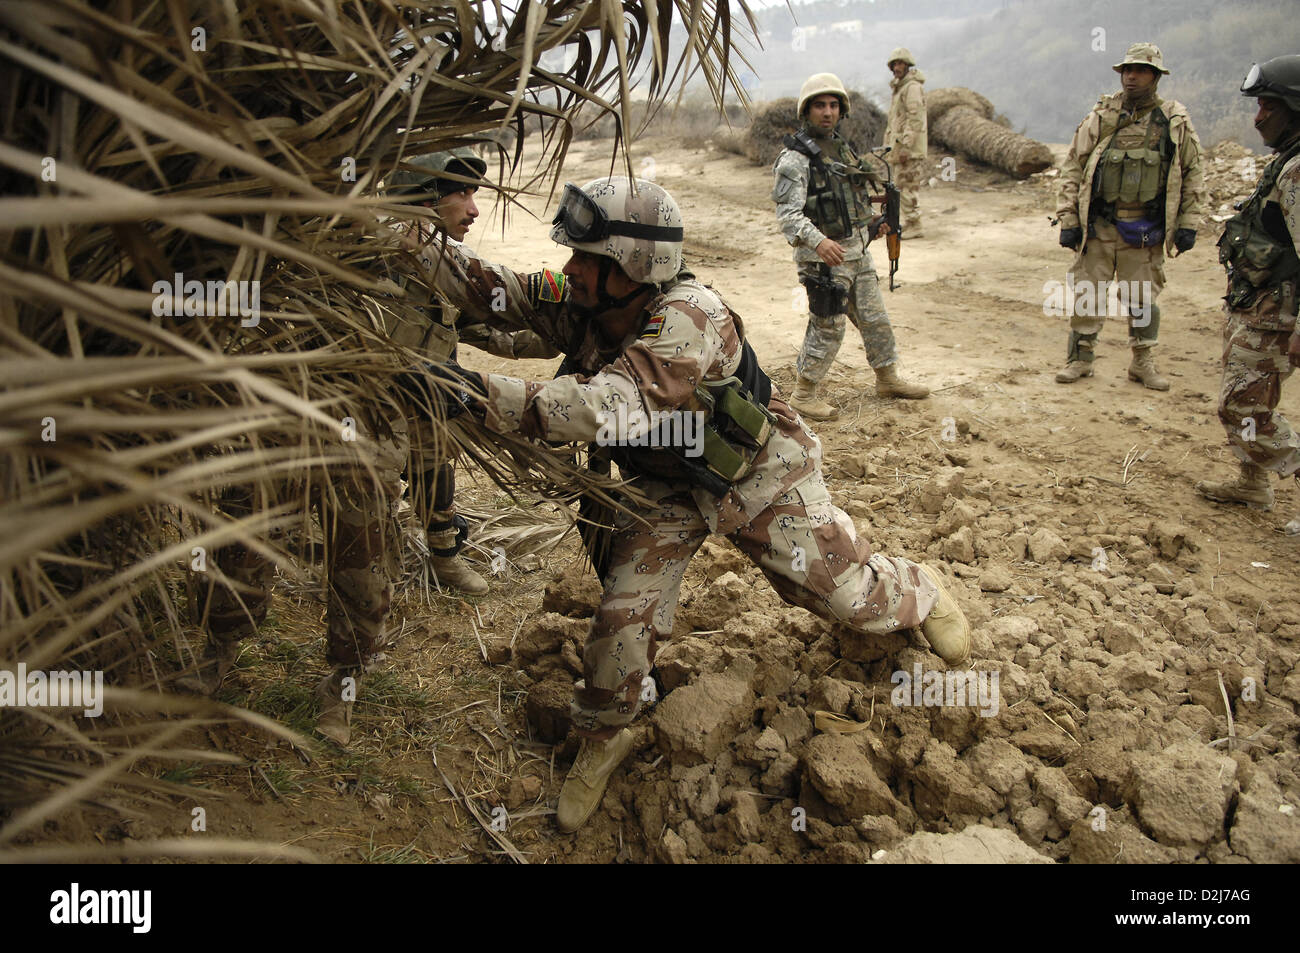 Iraqi army soldiers try to tear down a palm fence while searching for insurgents and weapons caches in Chubinait, Iraq, February 3, 2007. Stock Photo